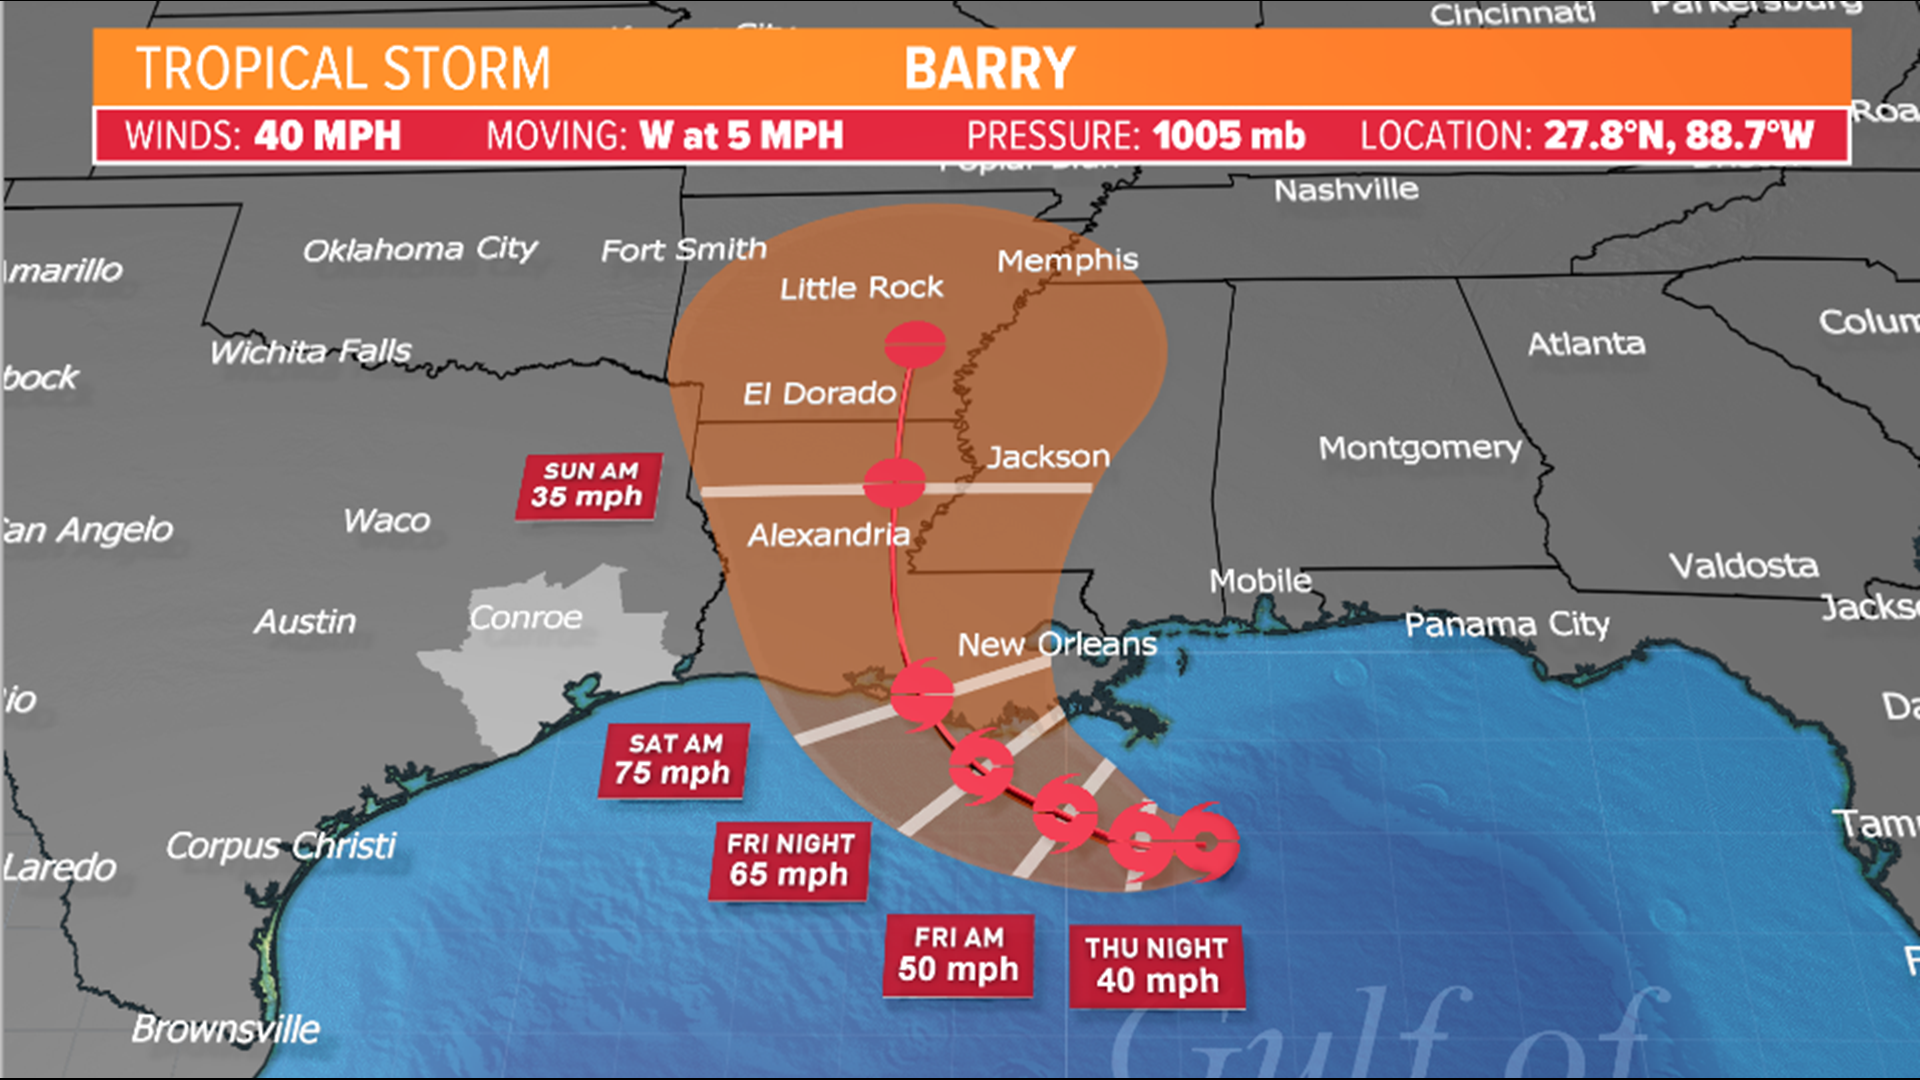 In its 10 a.m. update The National Hurricane Center upgraded the system to Tropical Storm Barry, but it will likely strengthen to a Cat. 1 hurricane by the time it makes landfall. The Louisiana coast is the primary target.